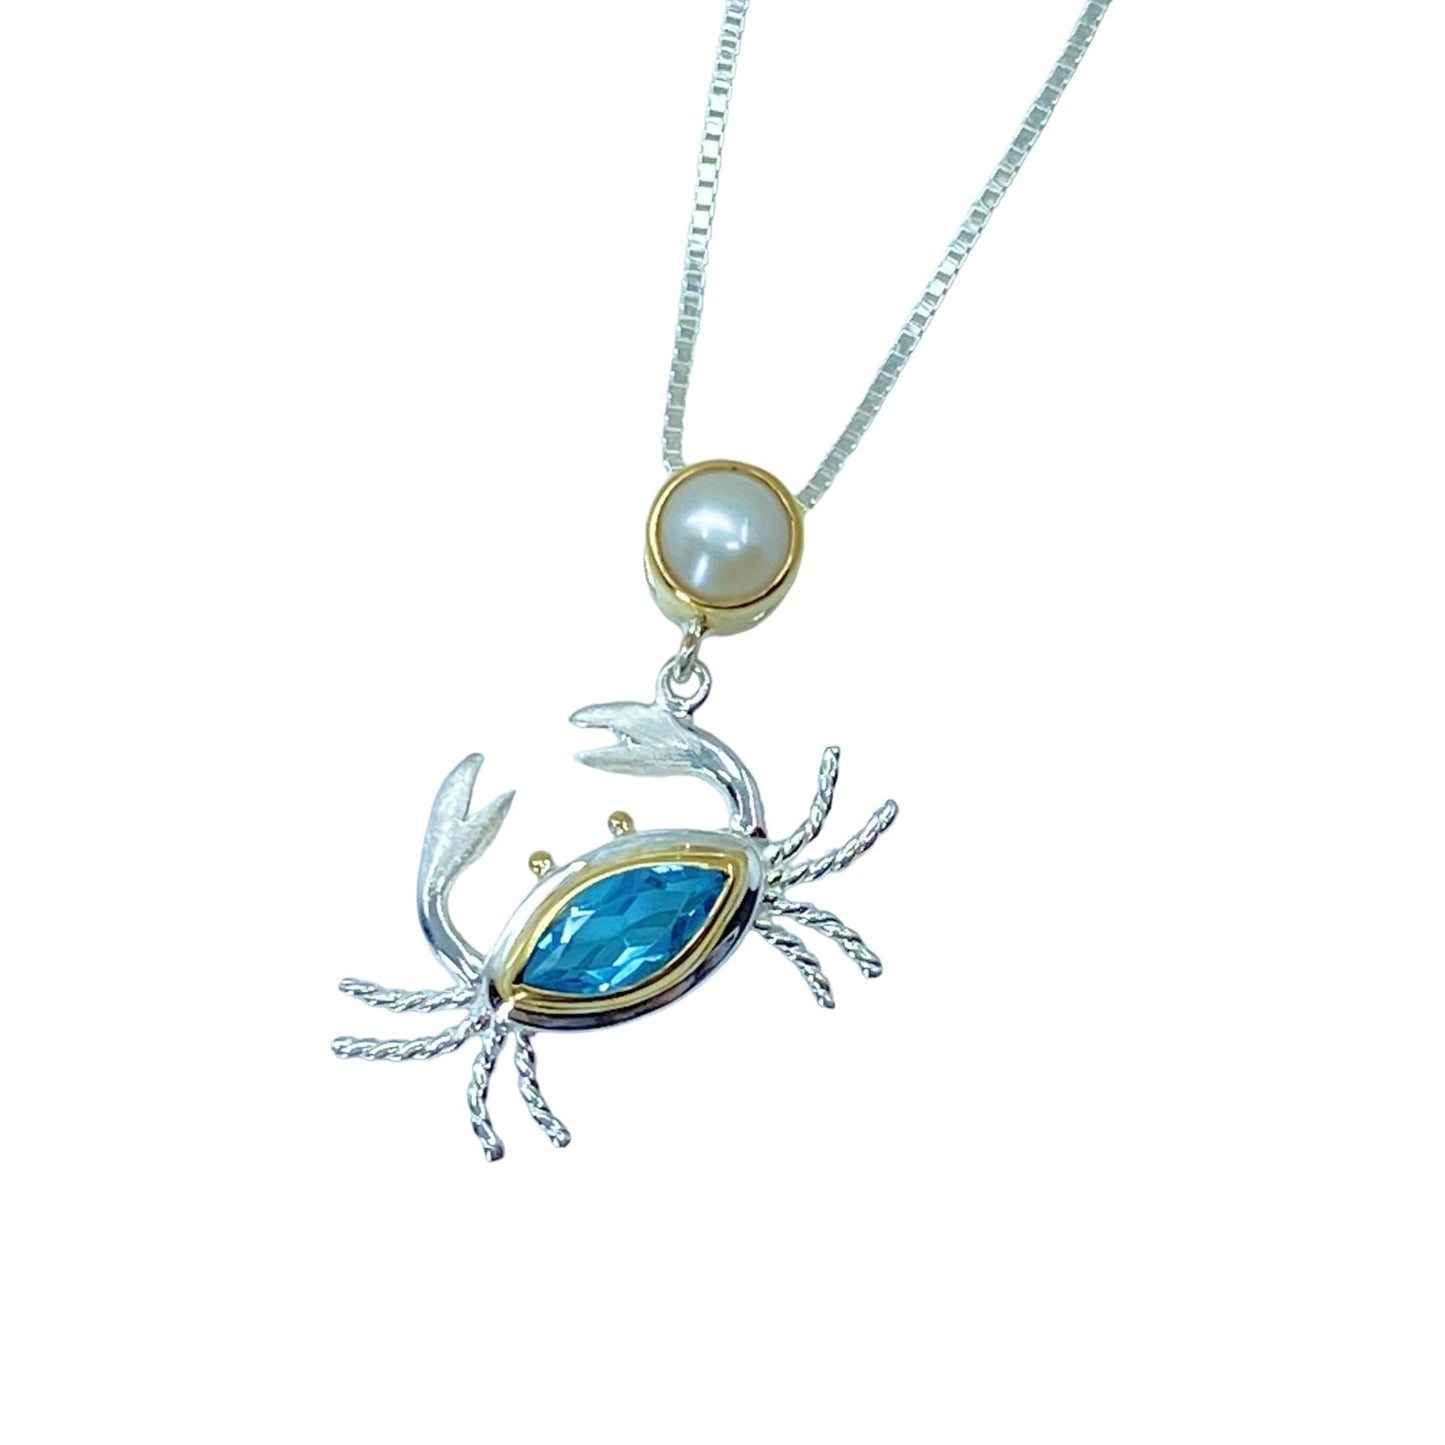 Two Tone Sterling Silver Crab Nautical Necklace